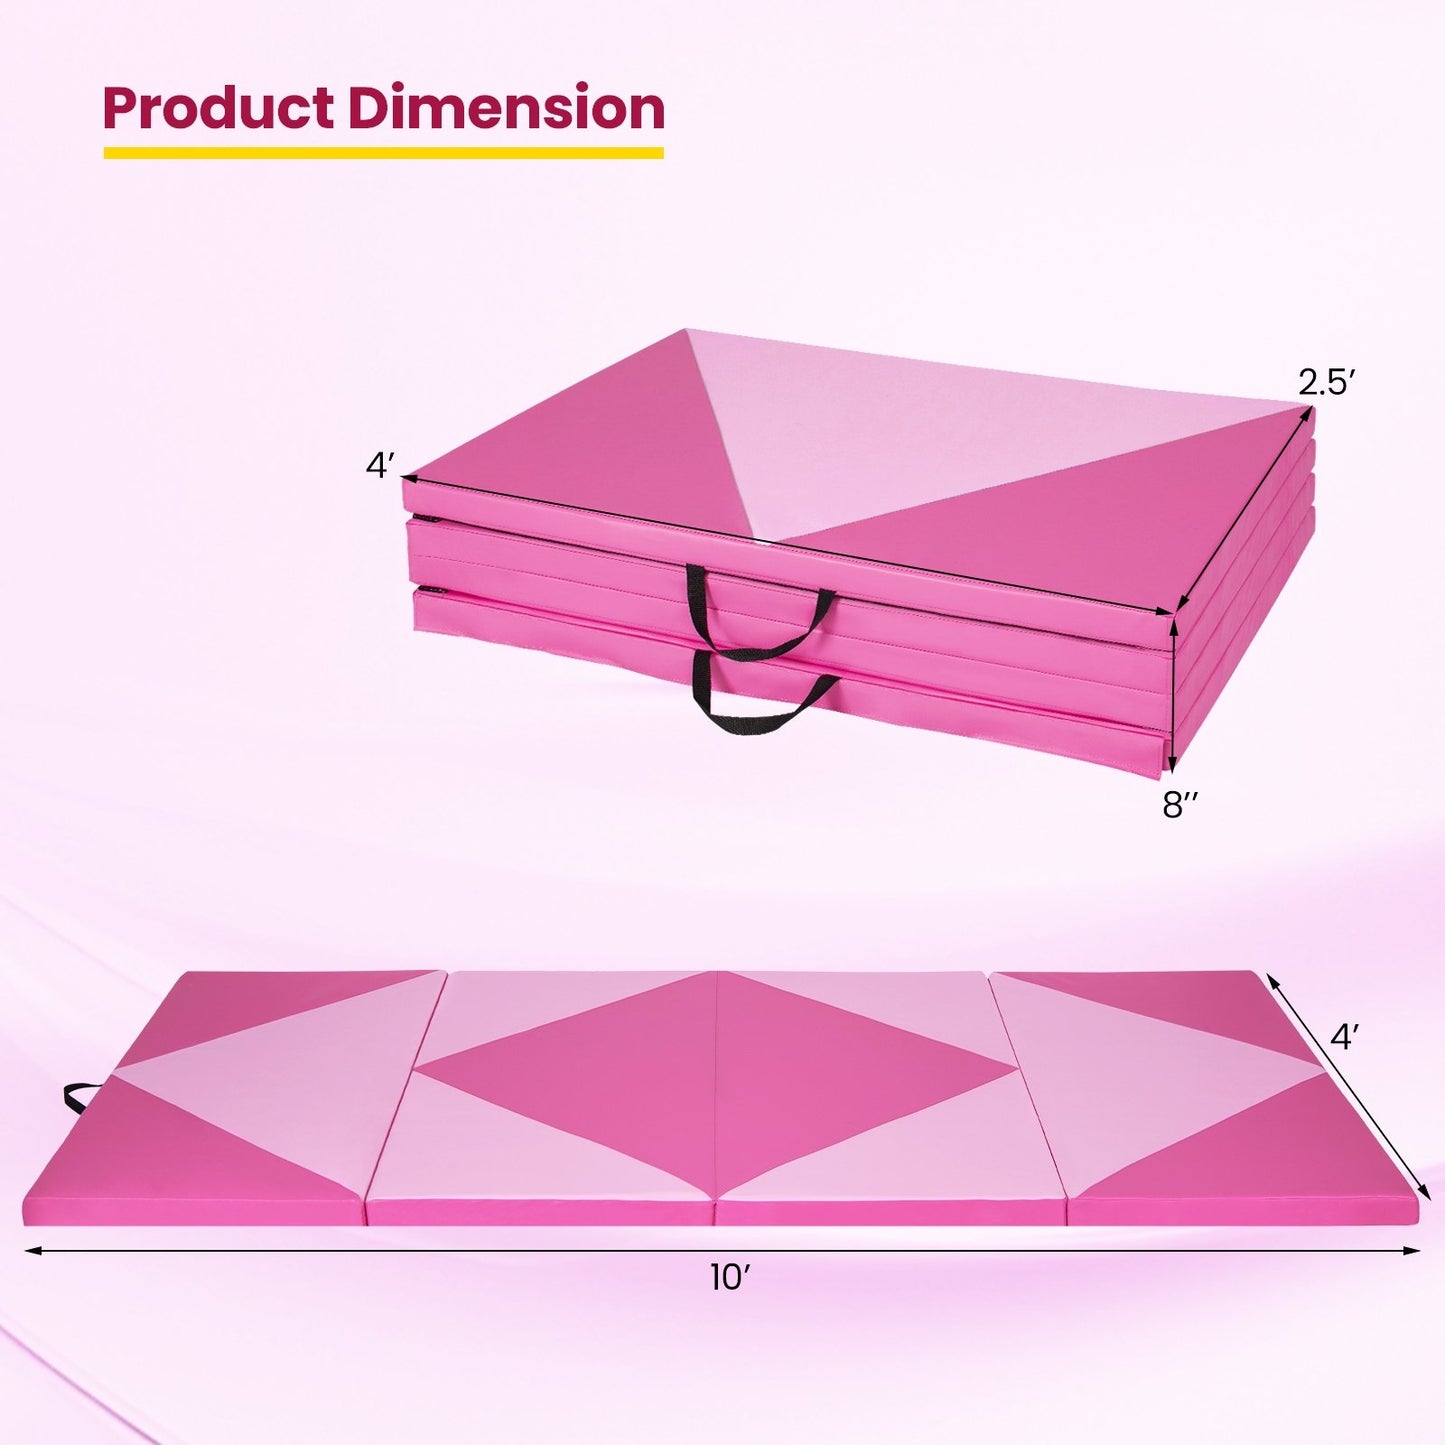 4-Panel PU Leather Folding Exercise Gym Mat with Hook and Loop Fasteners, Pink